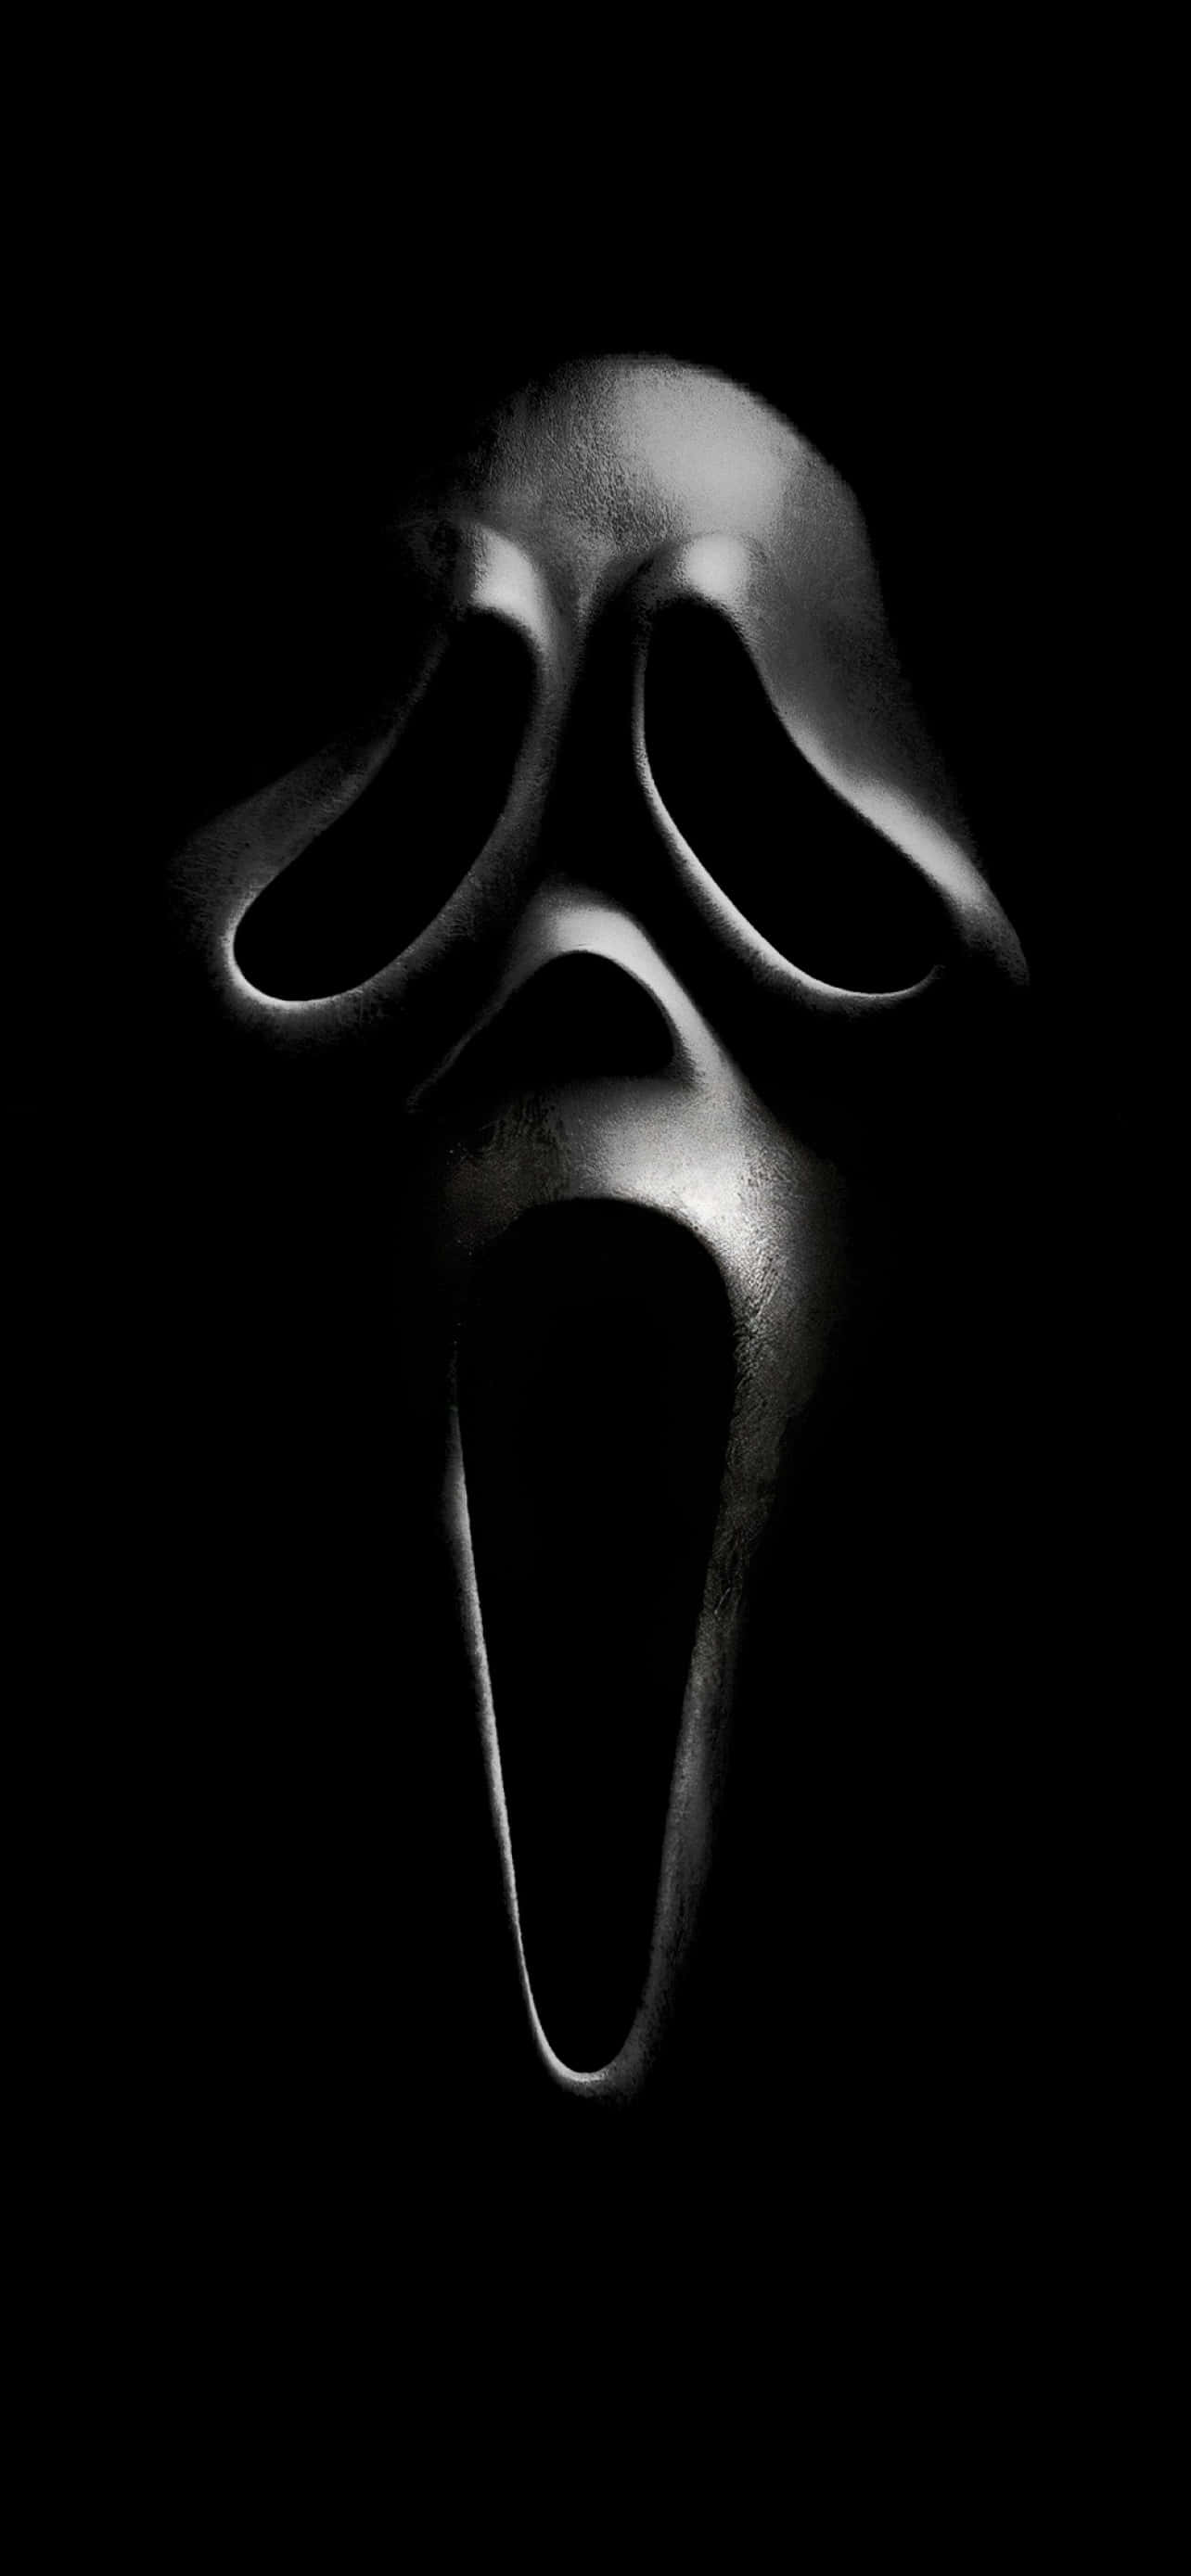 "Gaze in Awe at the Glowing Aesthetic of this Spooky Iphone Wallpaper" Wallpaper